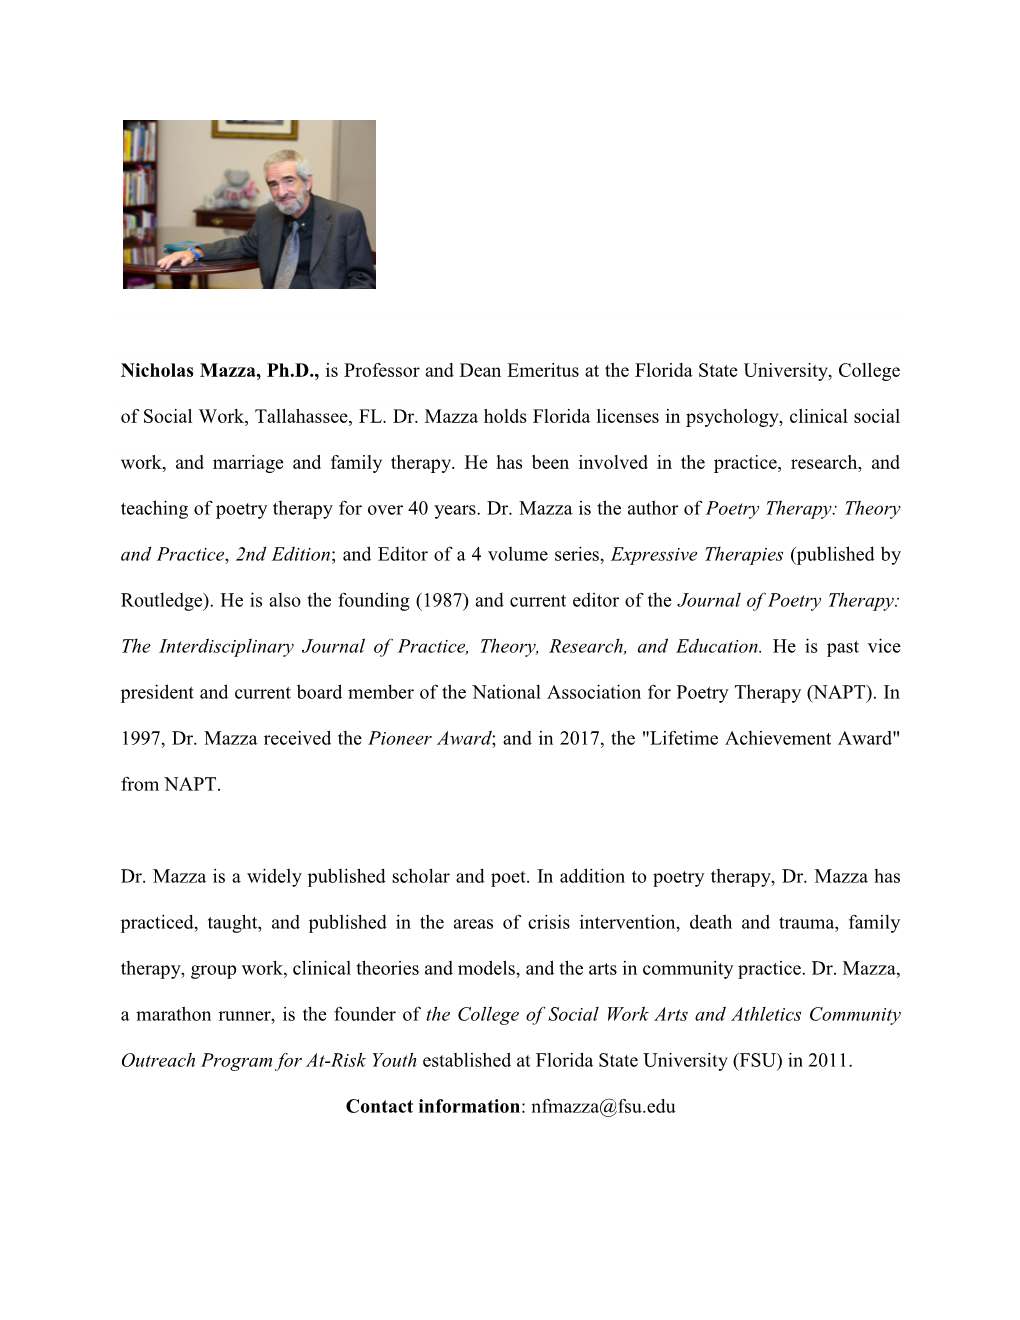 Nicholas Mazza, Ph.D., Is Professor and Dean Emeritus at the Florida State University, College of Social Work, Tallahassee, FL